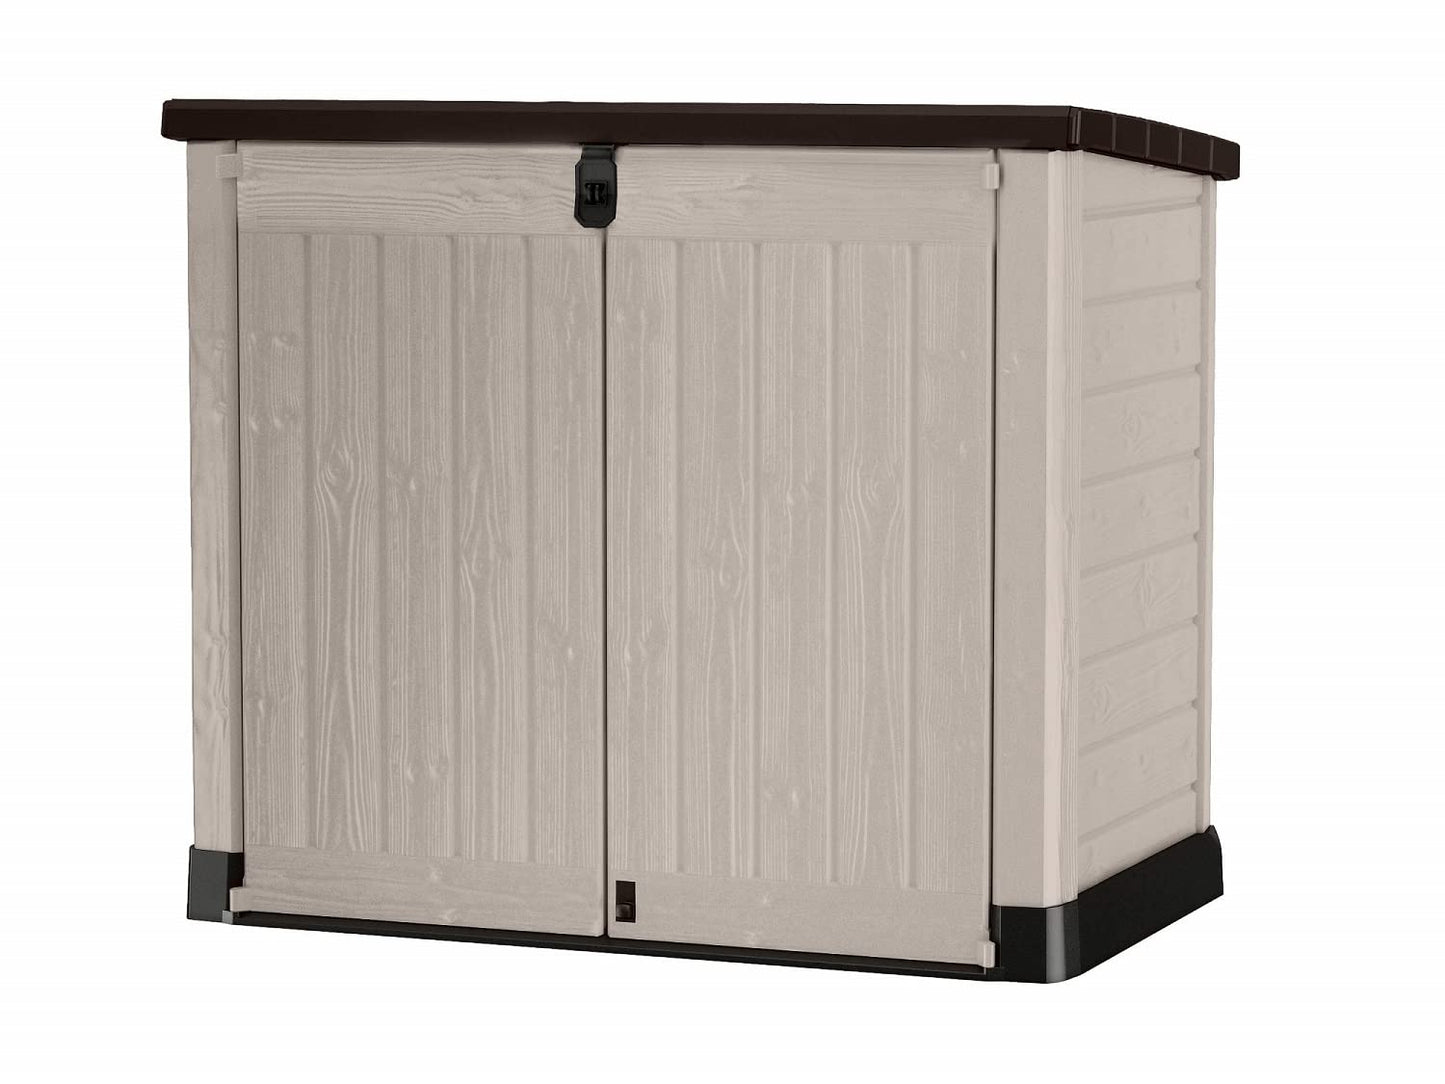 Keter Store It Out Midi Outdoor Plastic Garden Storage Shed - Beige/Brown